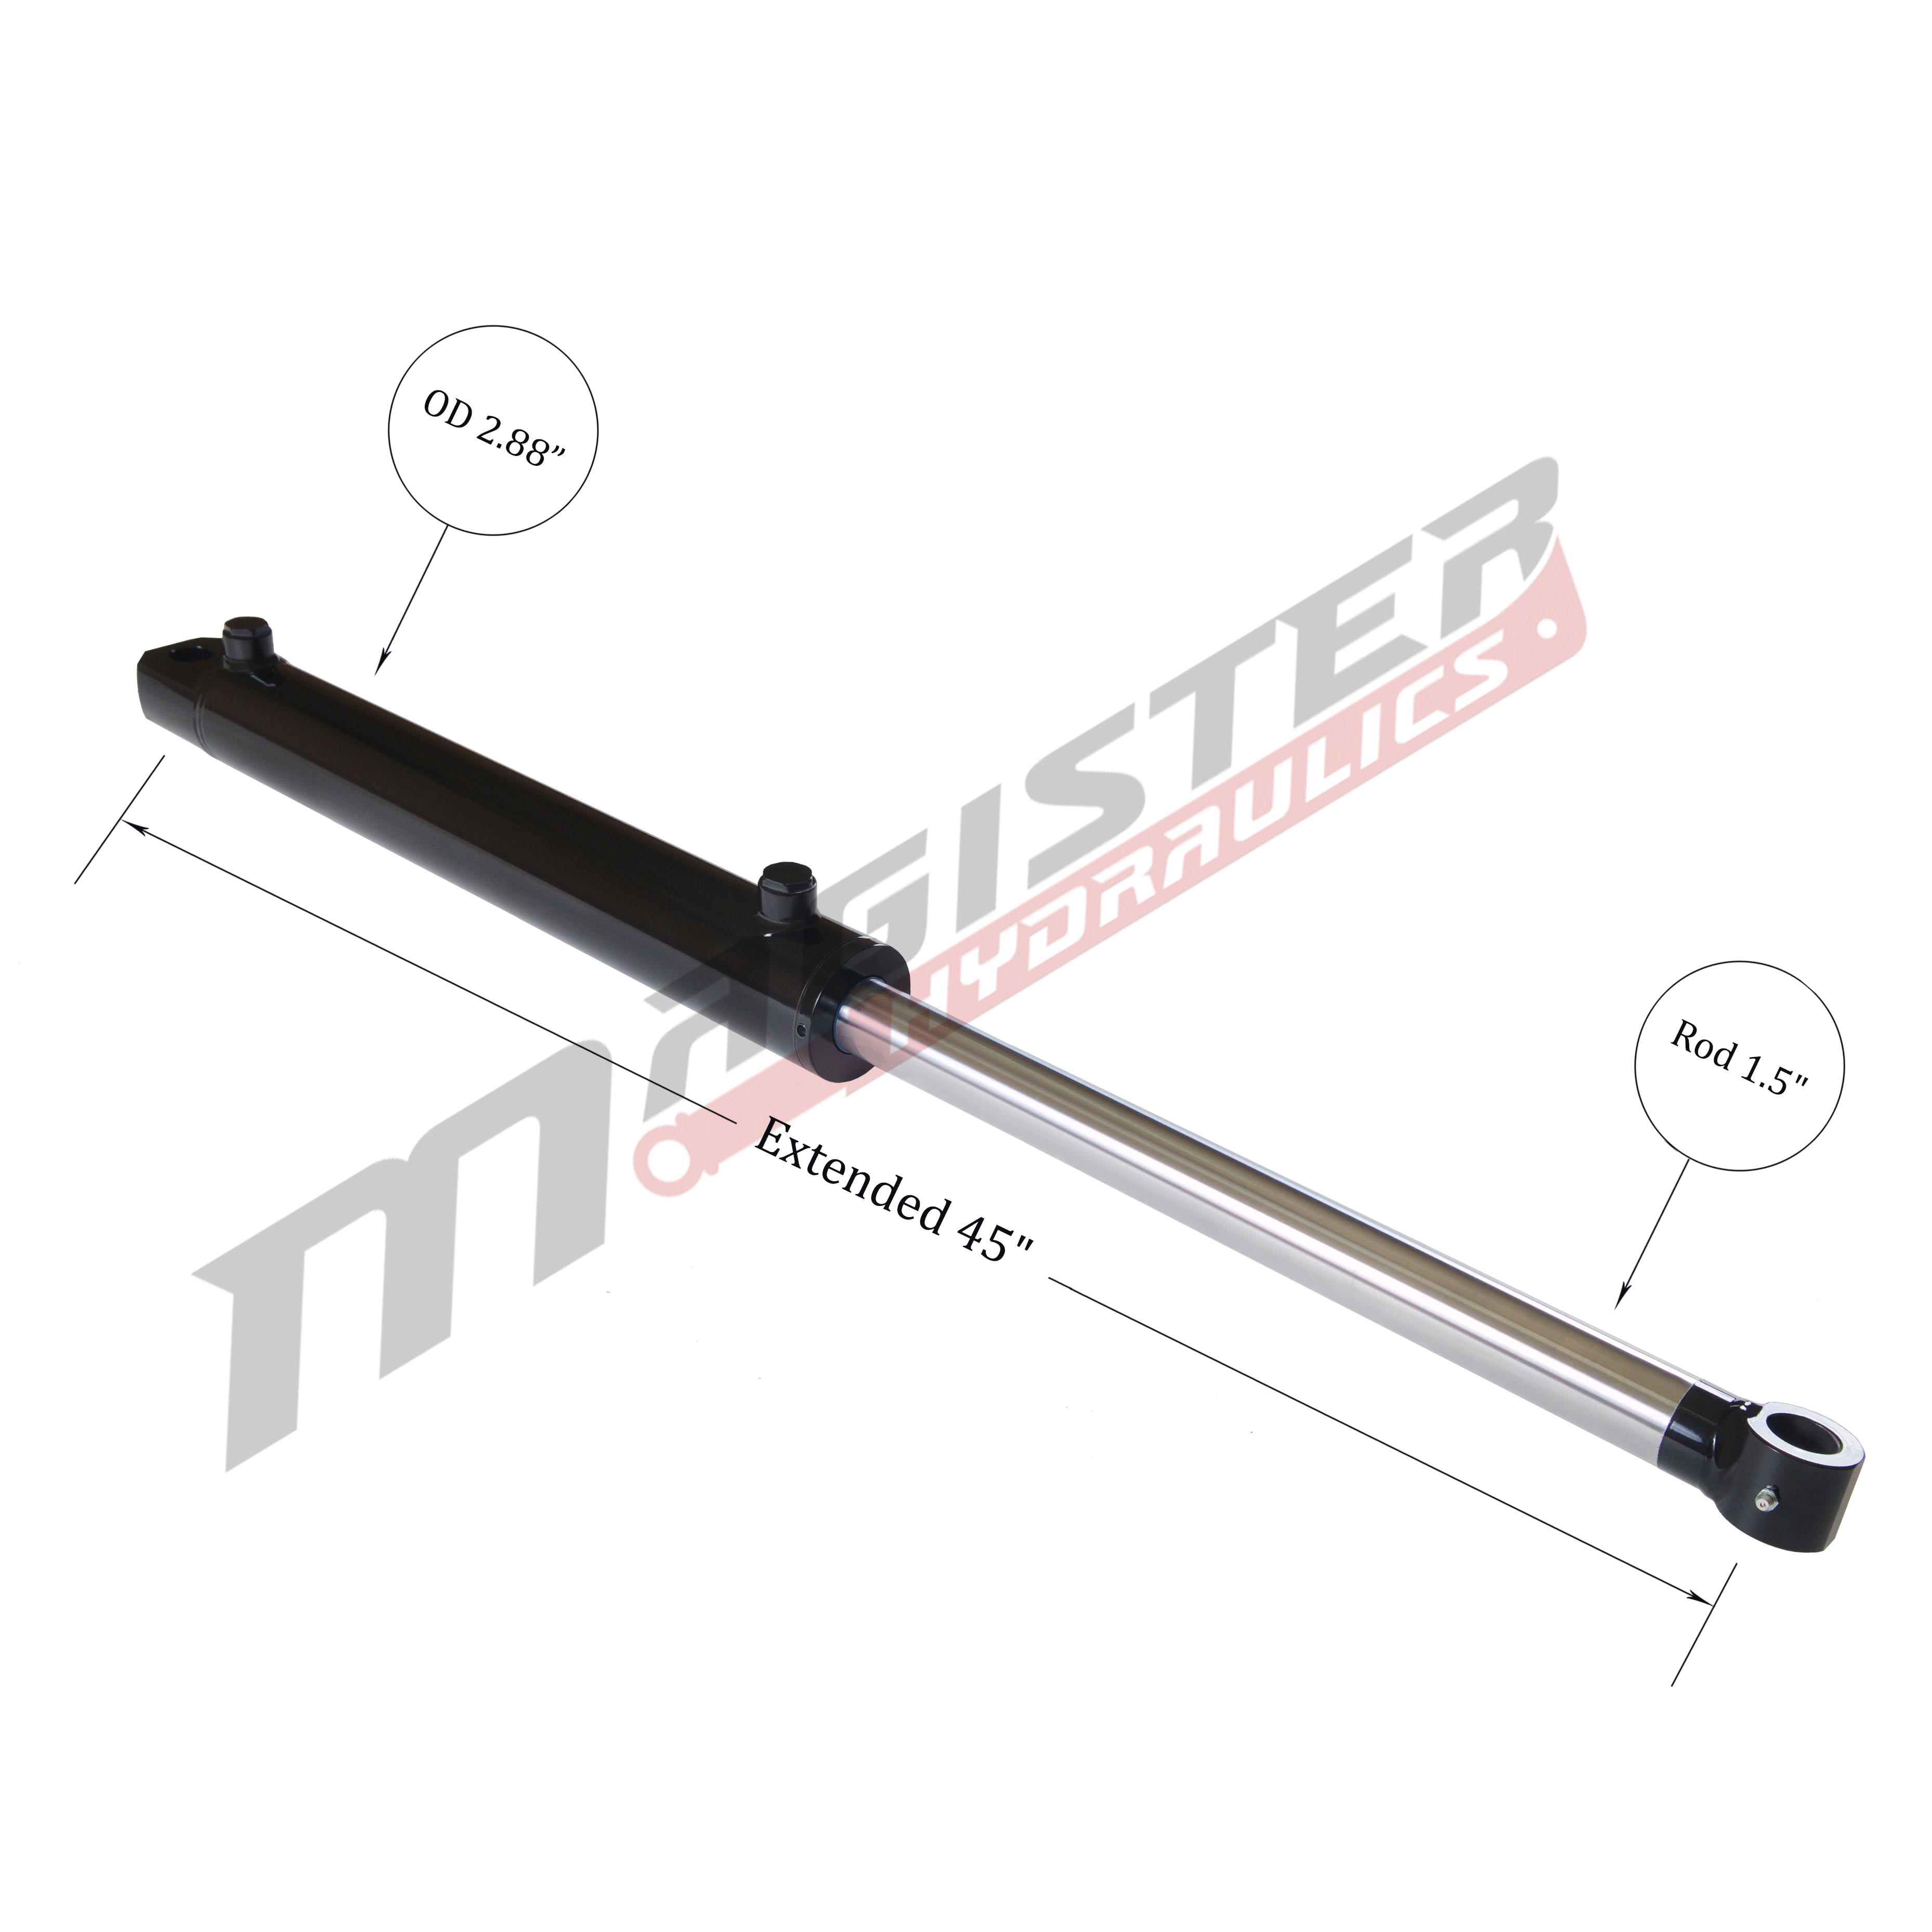 2.5 bore x 18 stroke hydraulic cylinder, welded tang double acting cylinder | Magister Hydraulics